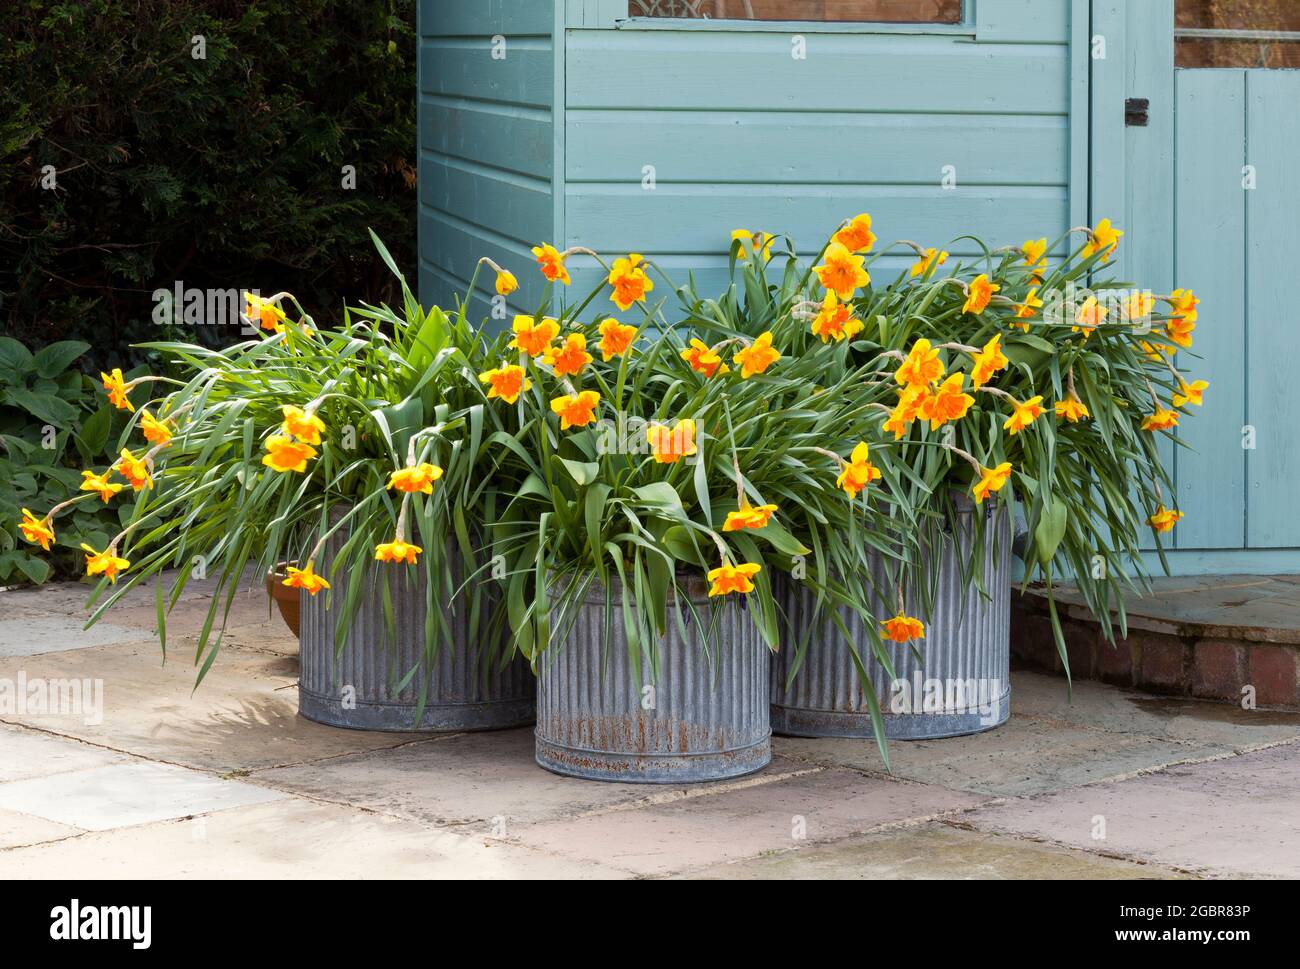 Narcissi flowers in galvanised planters Stock Photo